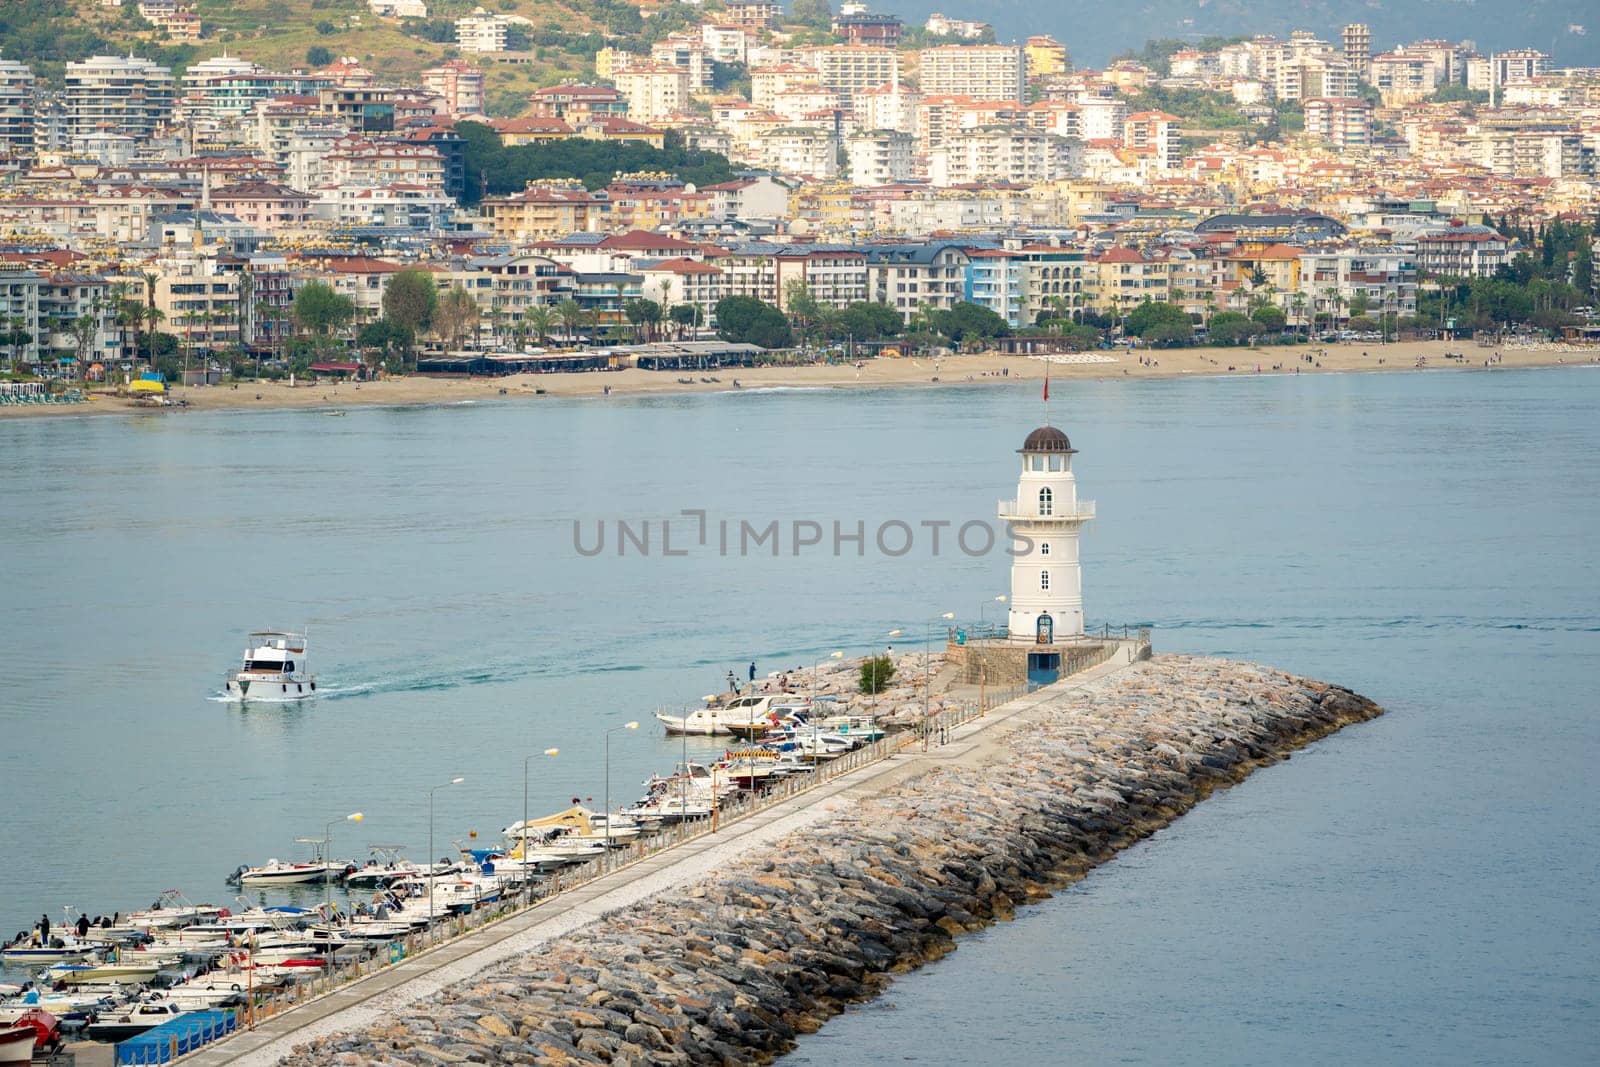 Lighthouse in Alanya marina, one of the touristic districts of Antalya